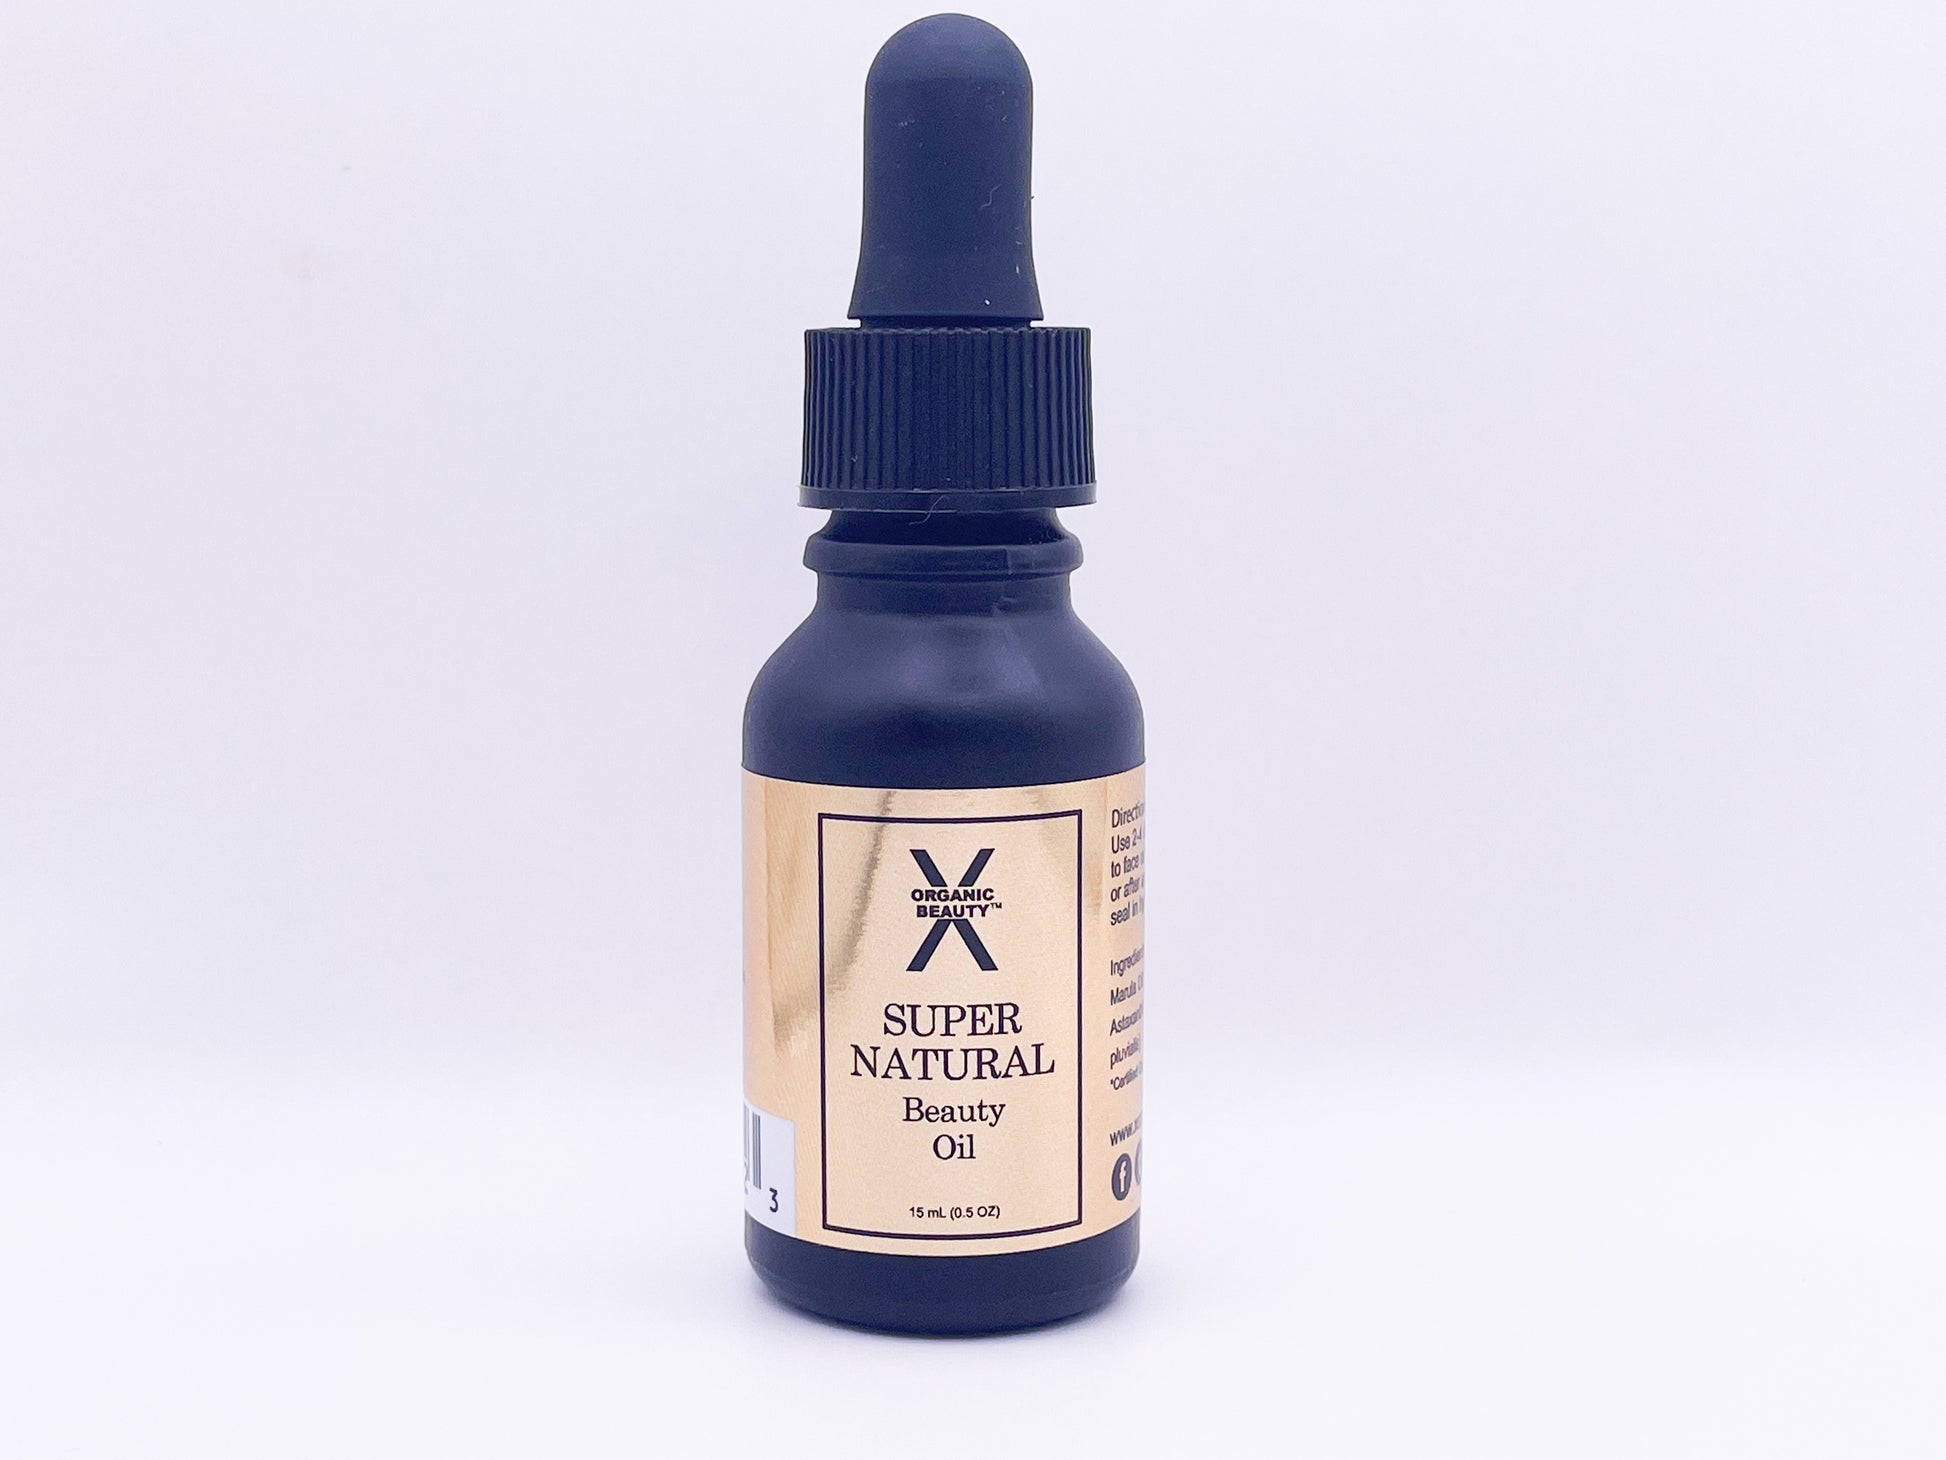 A front view of Super Natural Beauty Oil. A black bottle with a gold label.